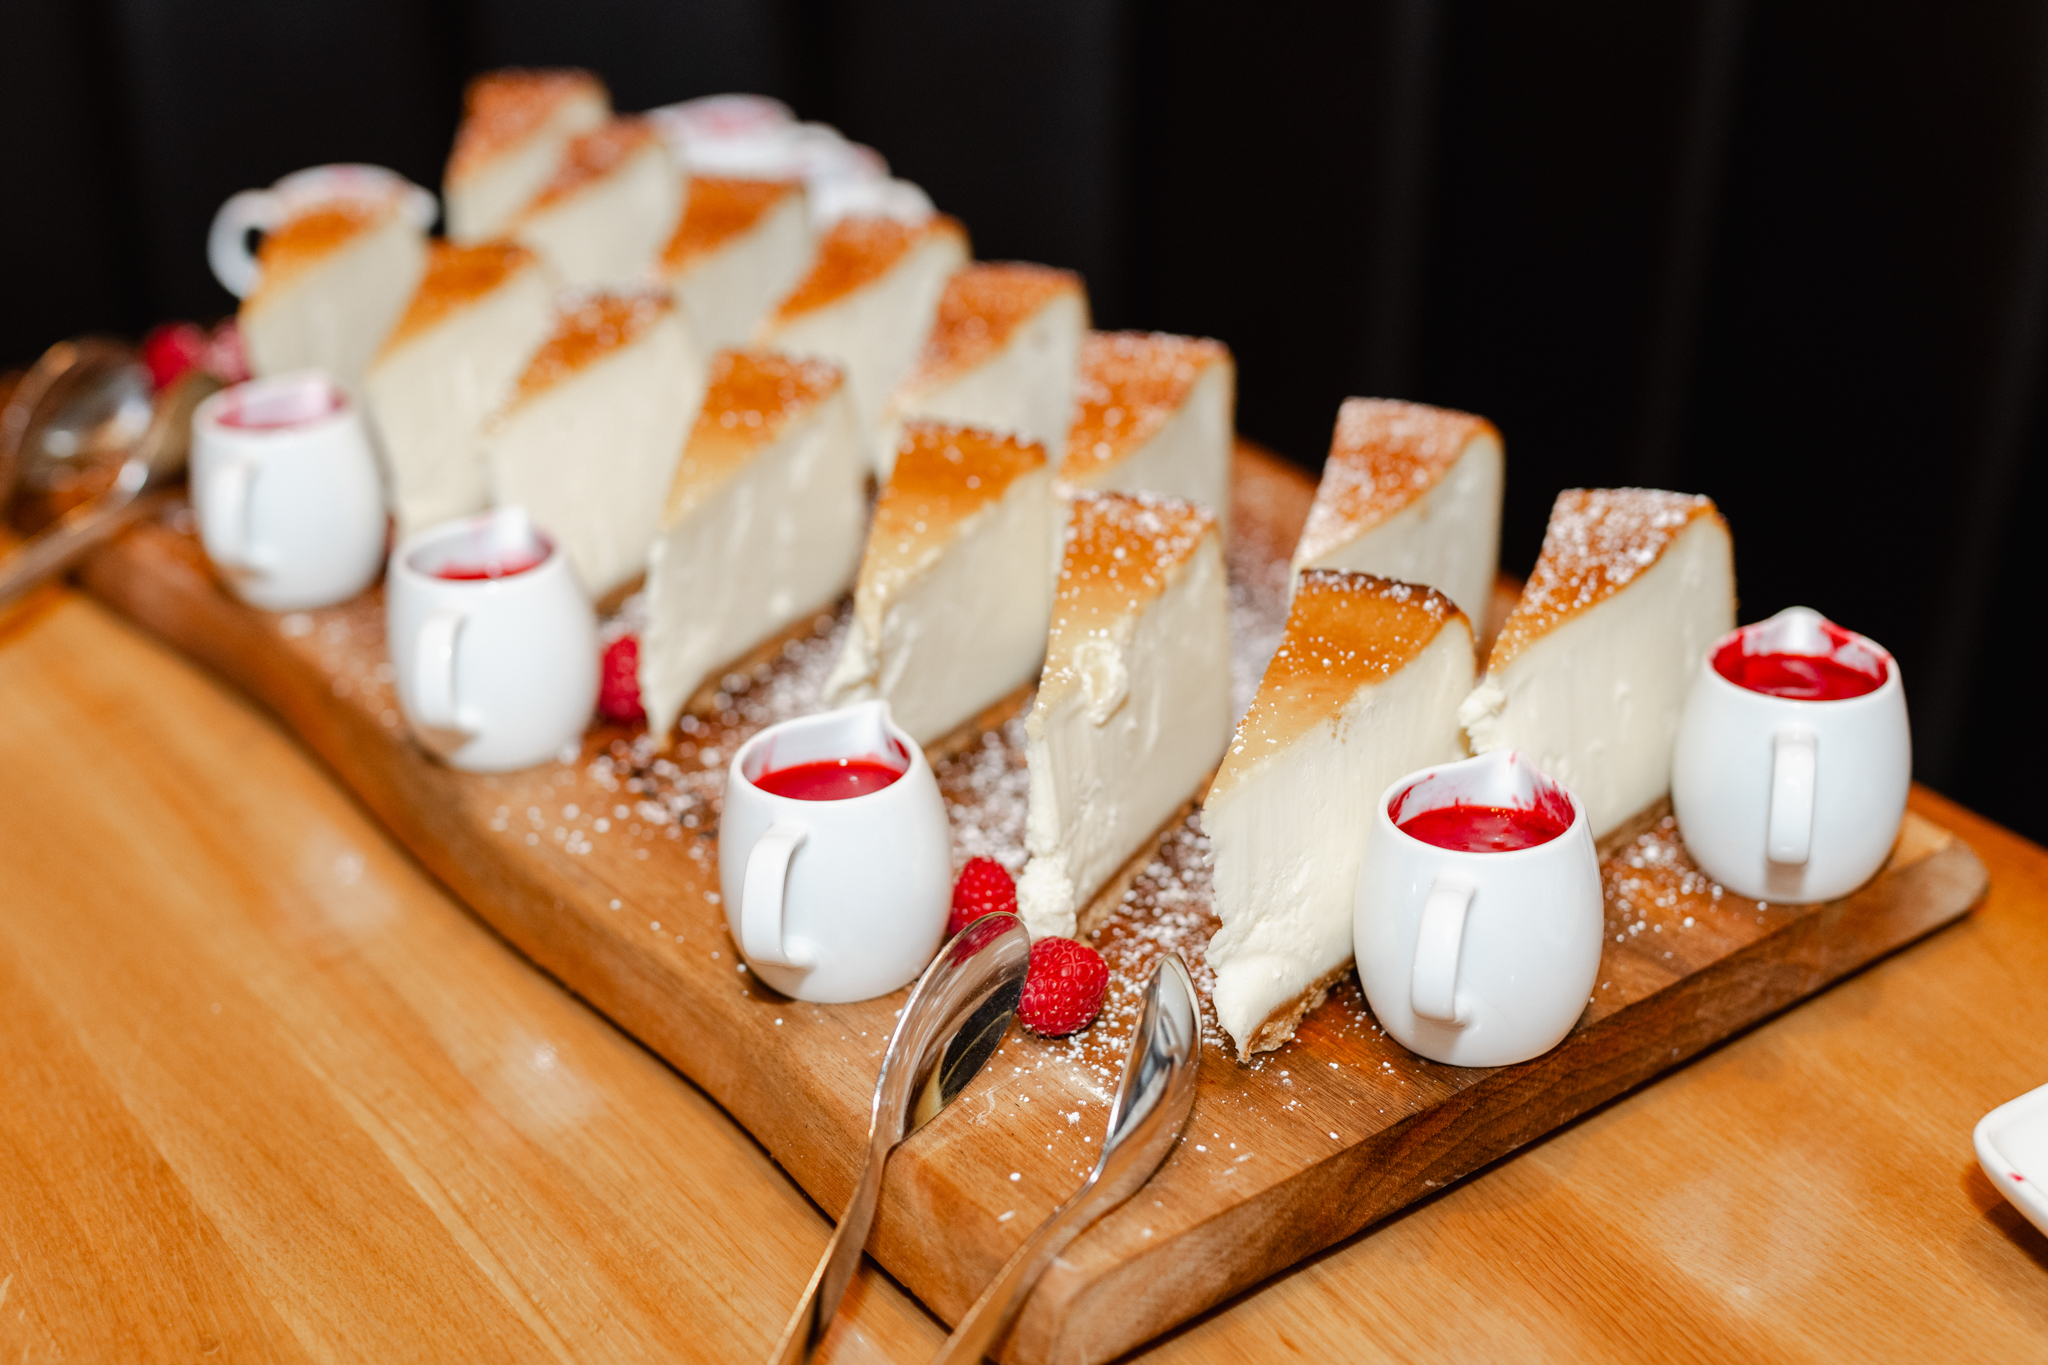 A stunning photograph capturing a delectable slice of cheesecake on a rustic wooden board, perfect for event photography.